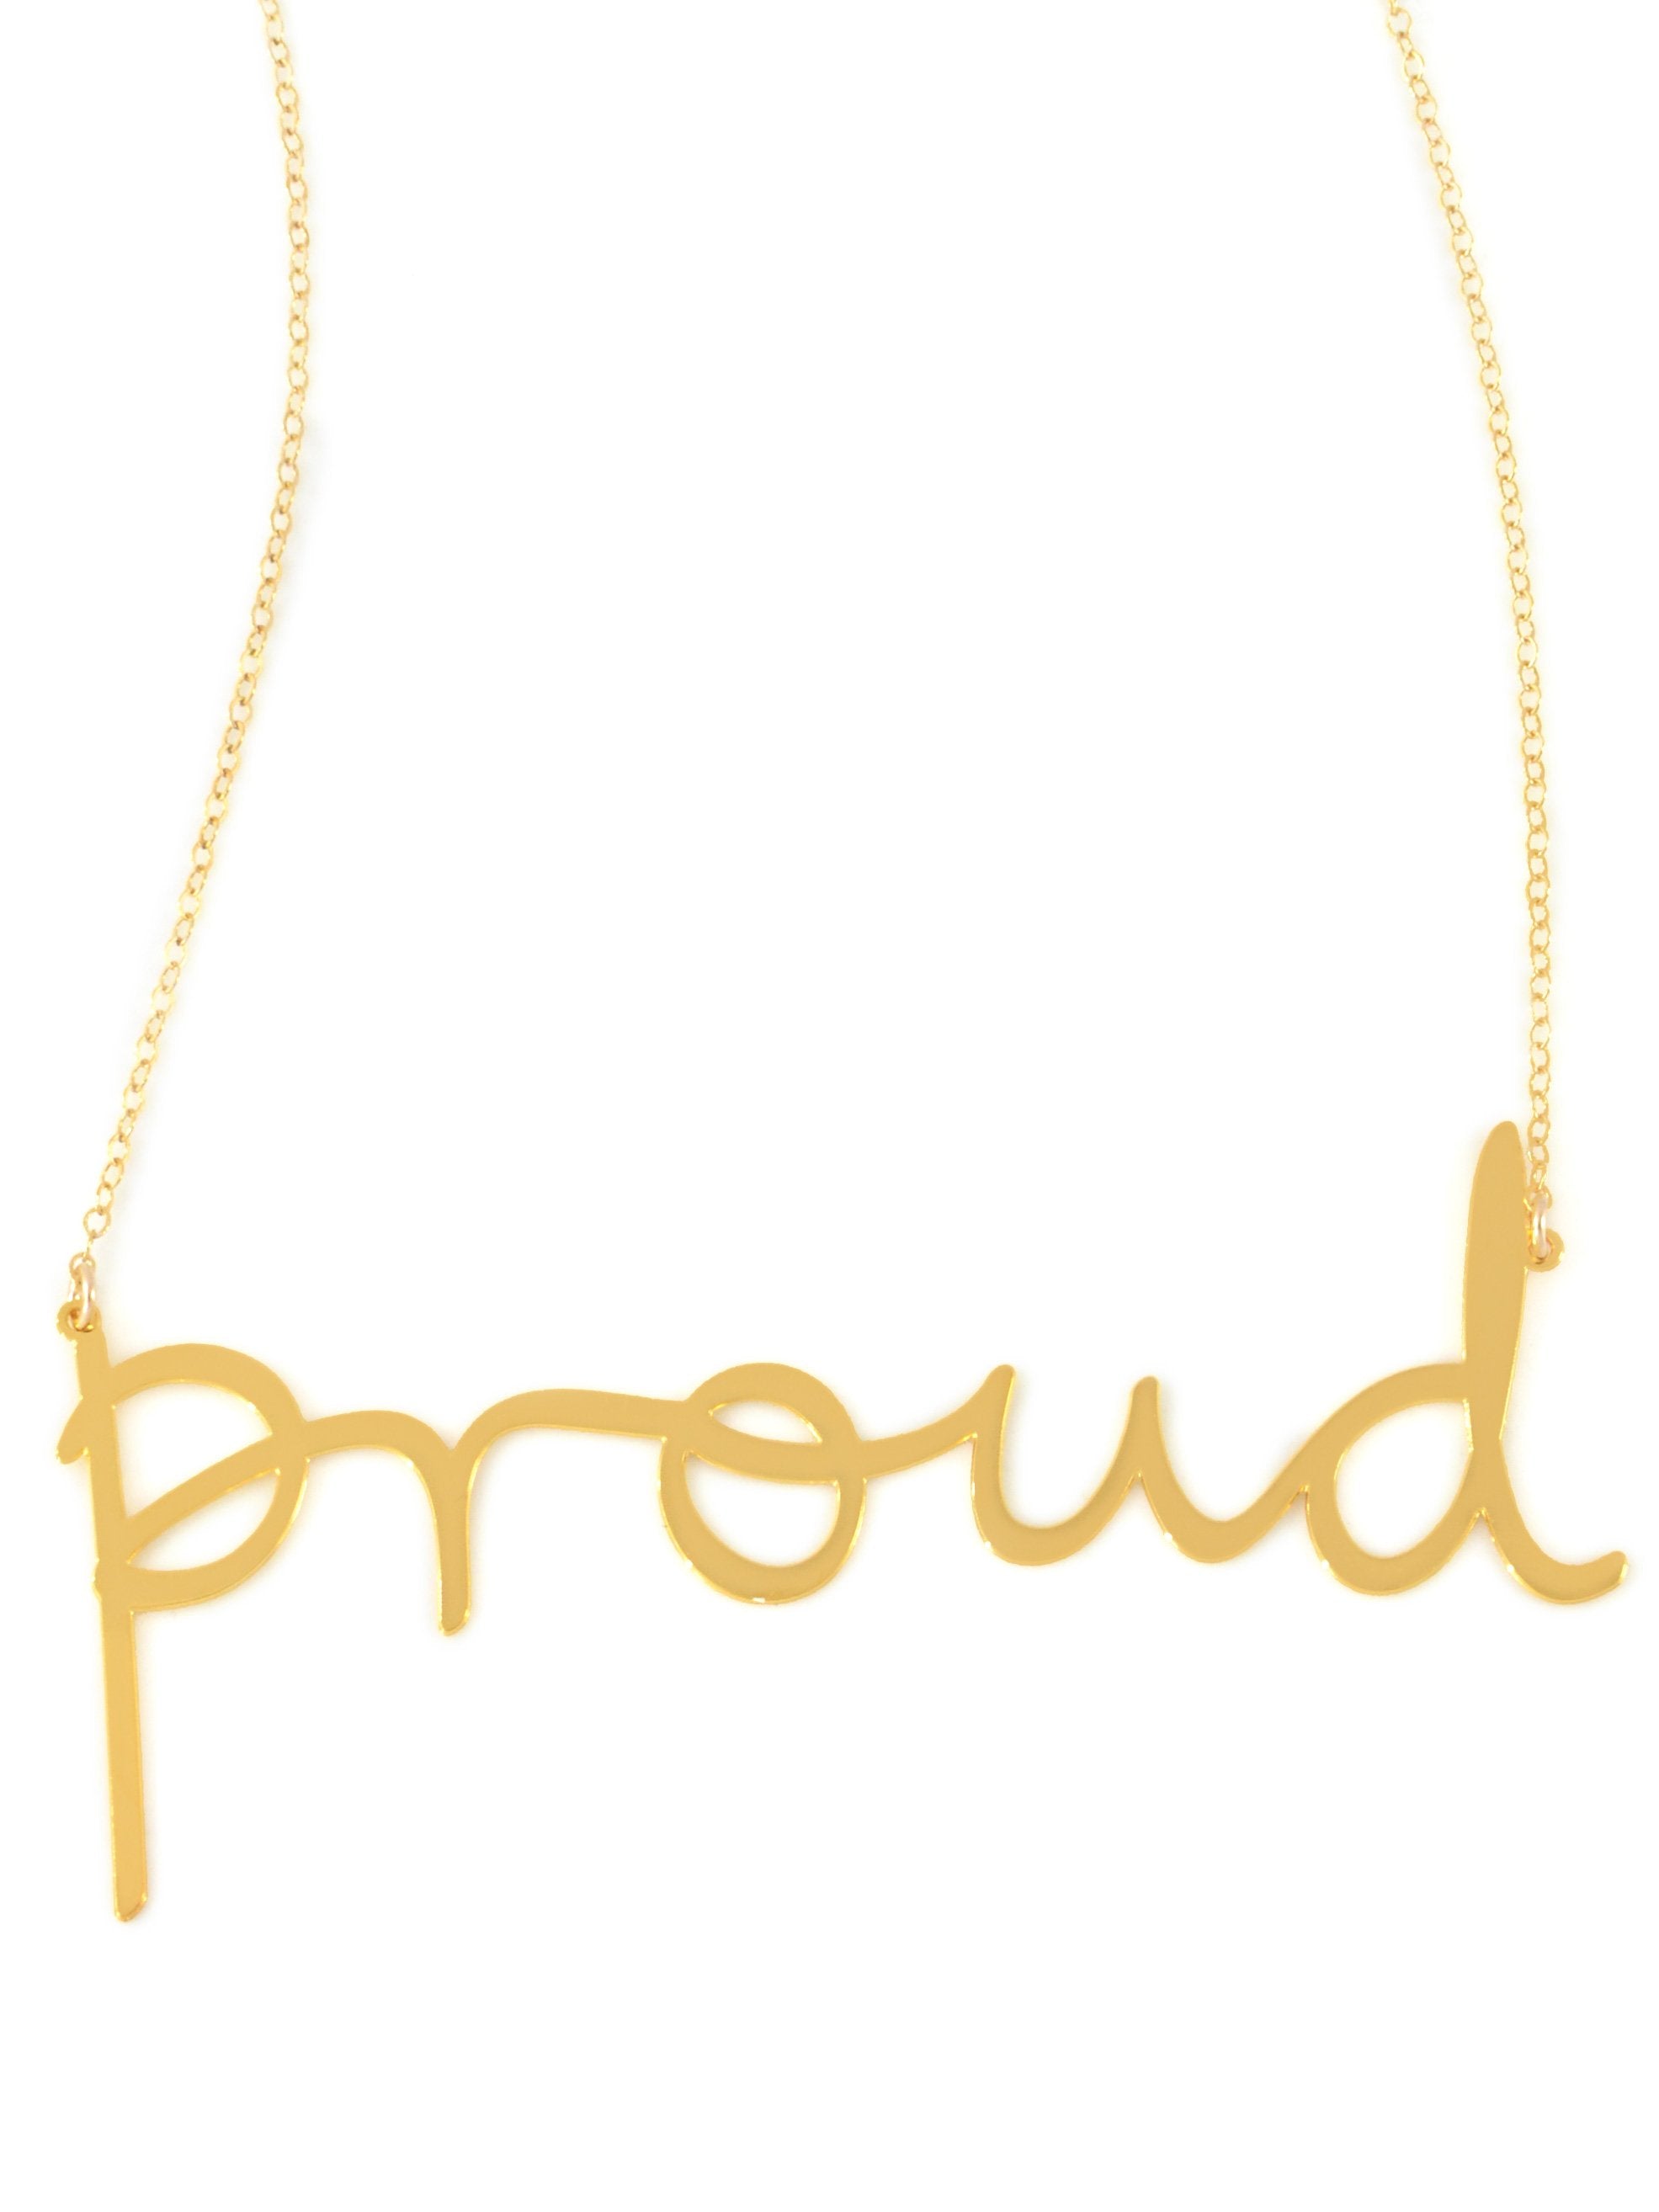 Proud Necklace - High Quality, Affordable, Hand Written, Empowering, Self Love, Mantra Word Necklace - Available in Gold and Silver - Small and Large Sizes - Made in USA - Brevity Jewelry